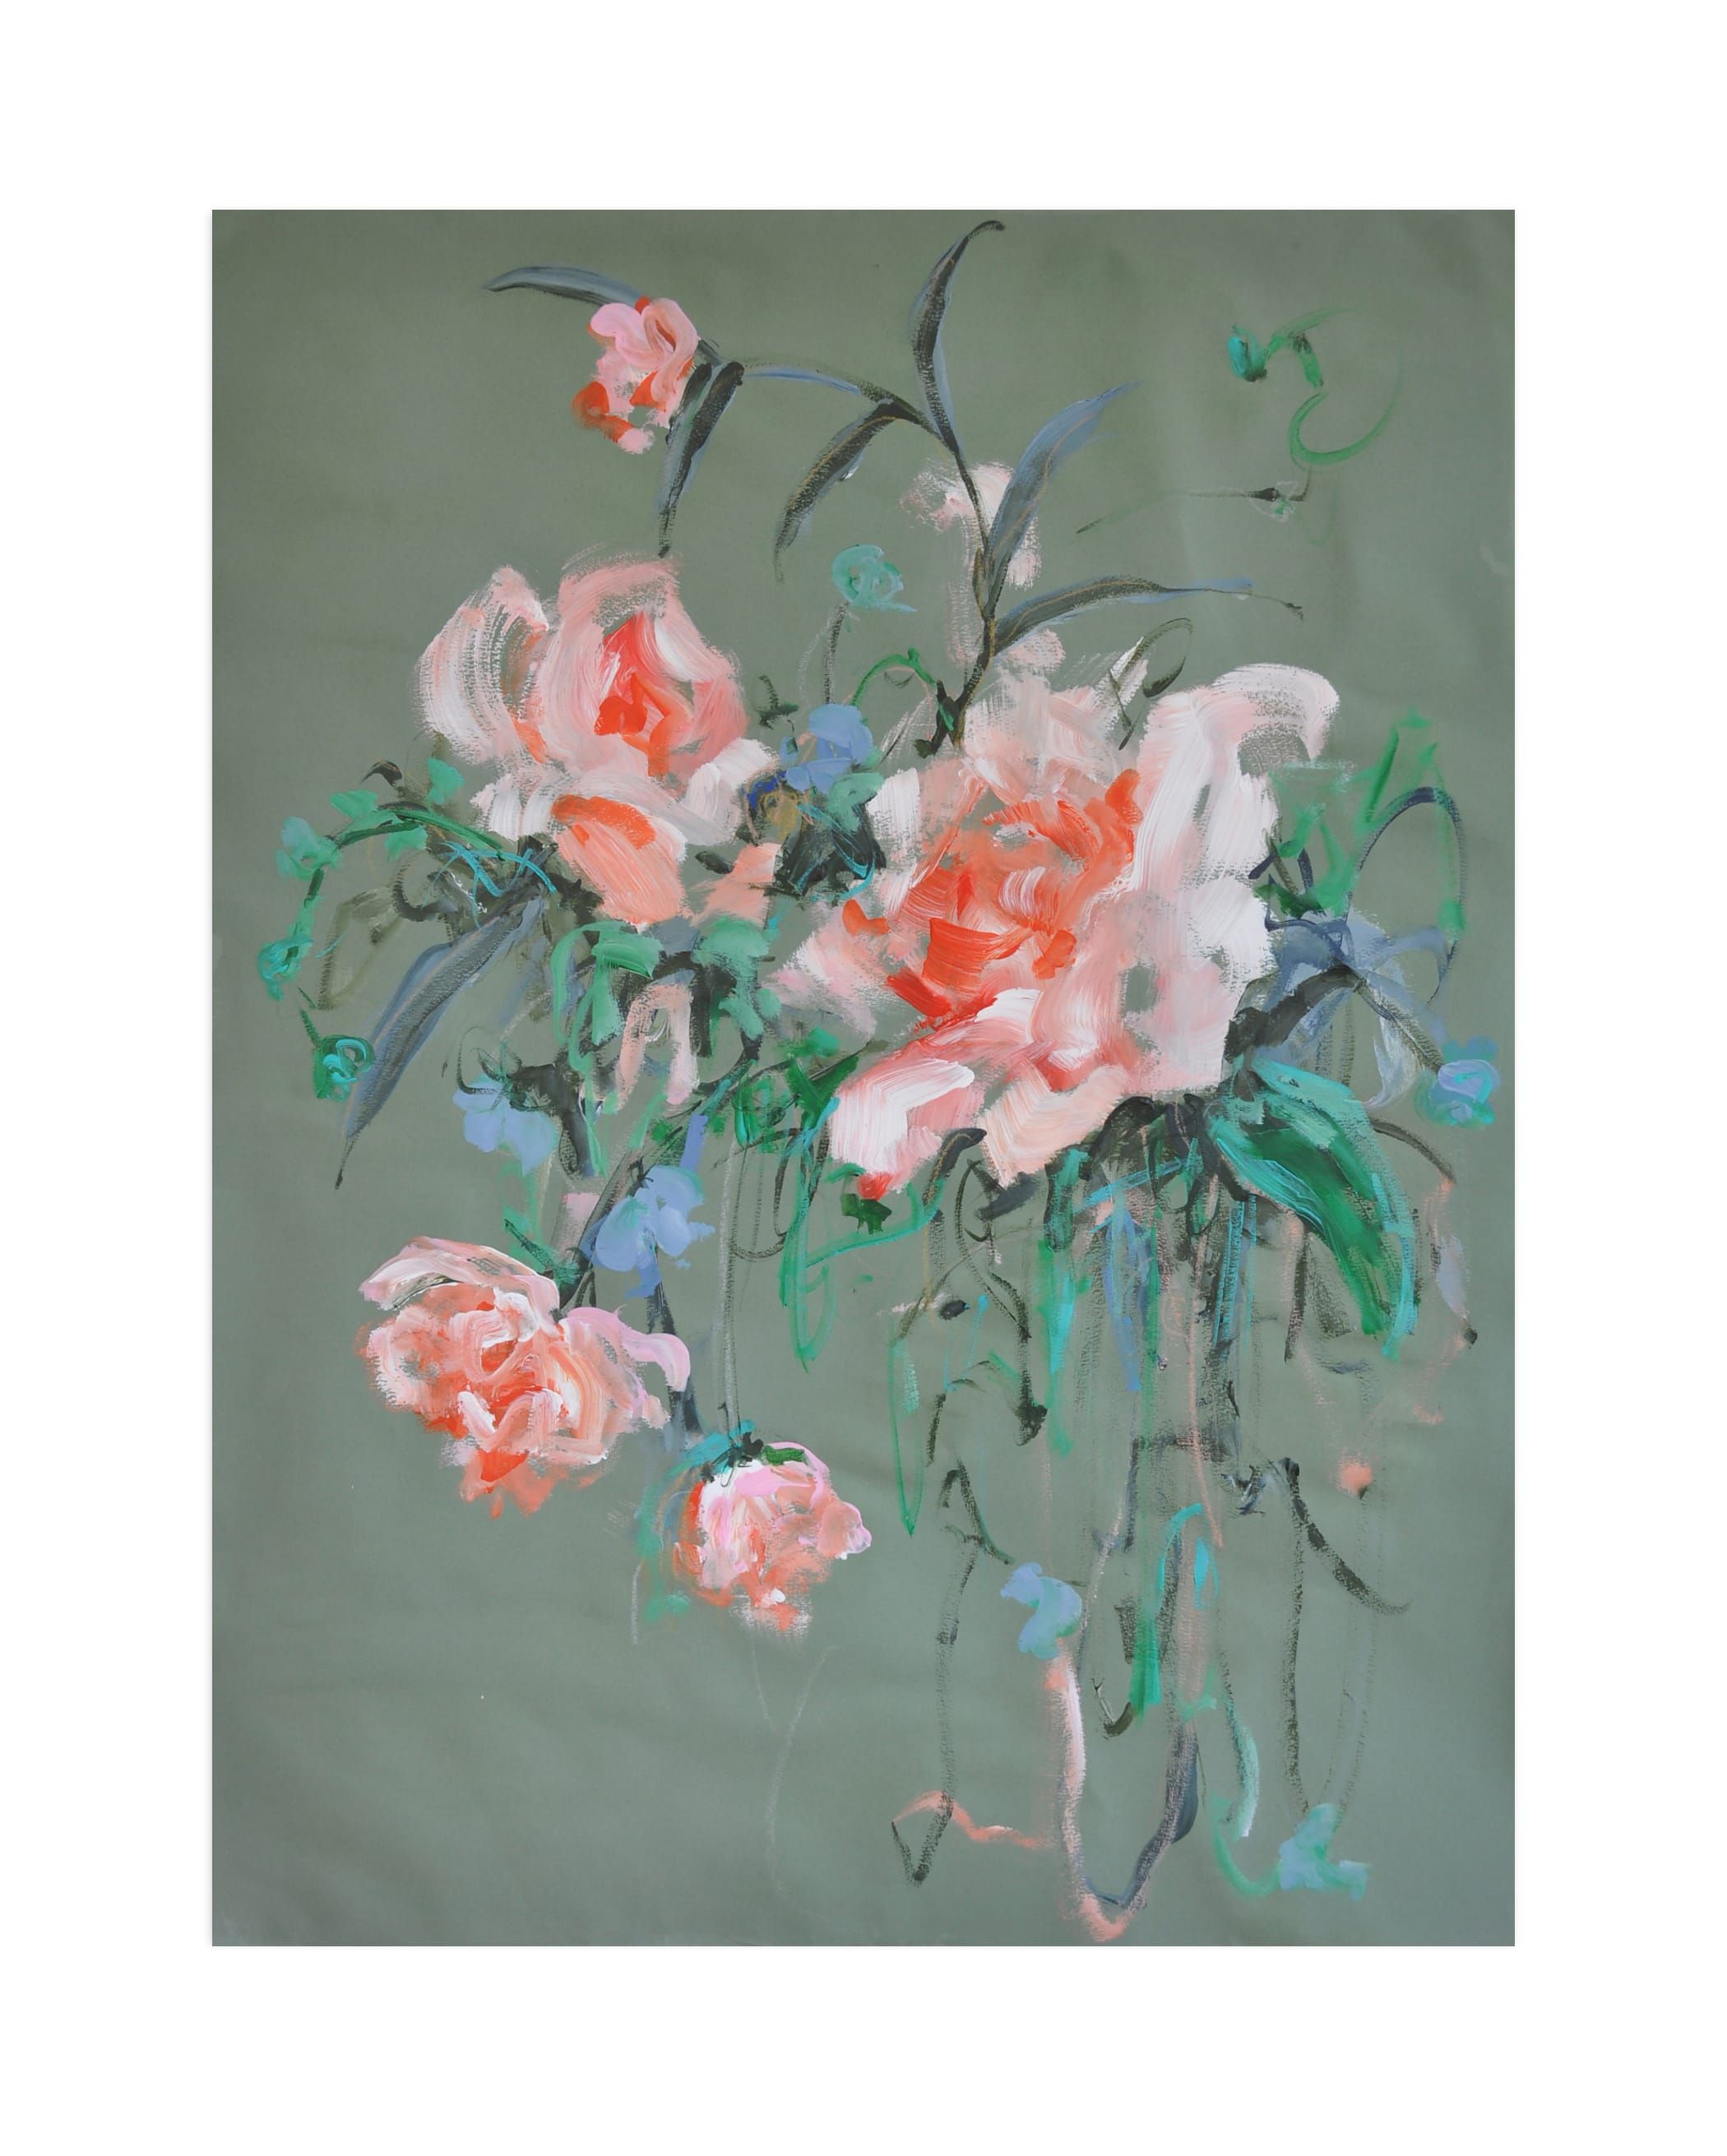 "Arrangement in Rose & Teal" - Painting Limited Edition Art Print by Sonal Nathwani. | Minted